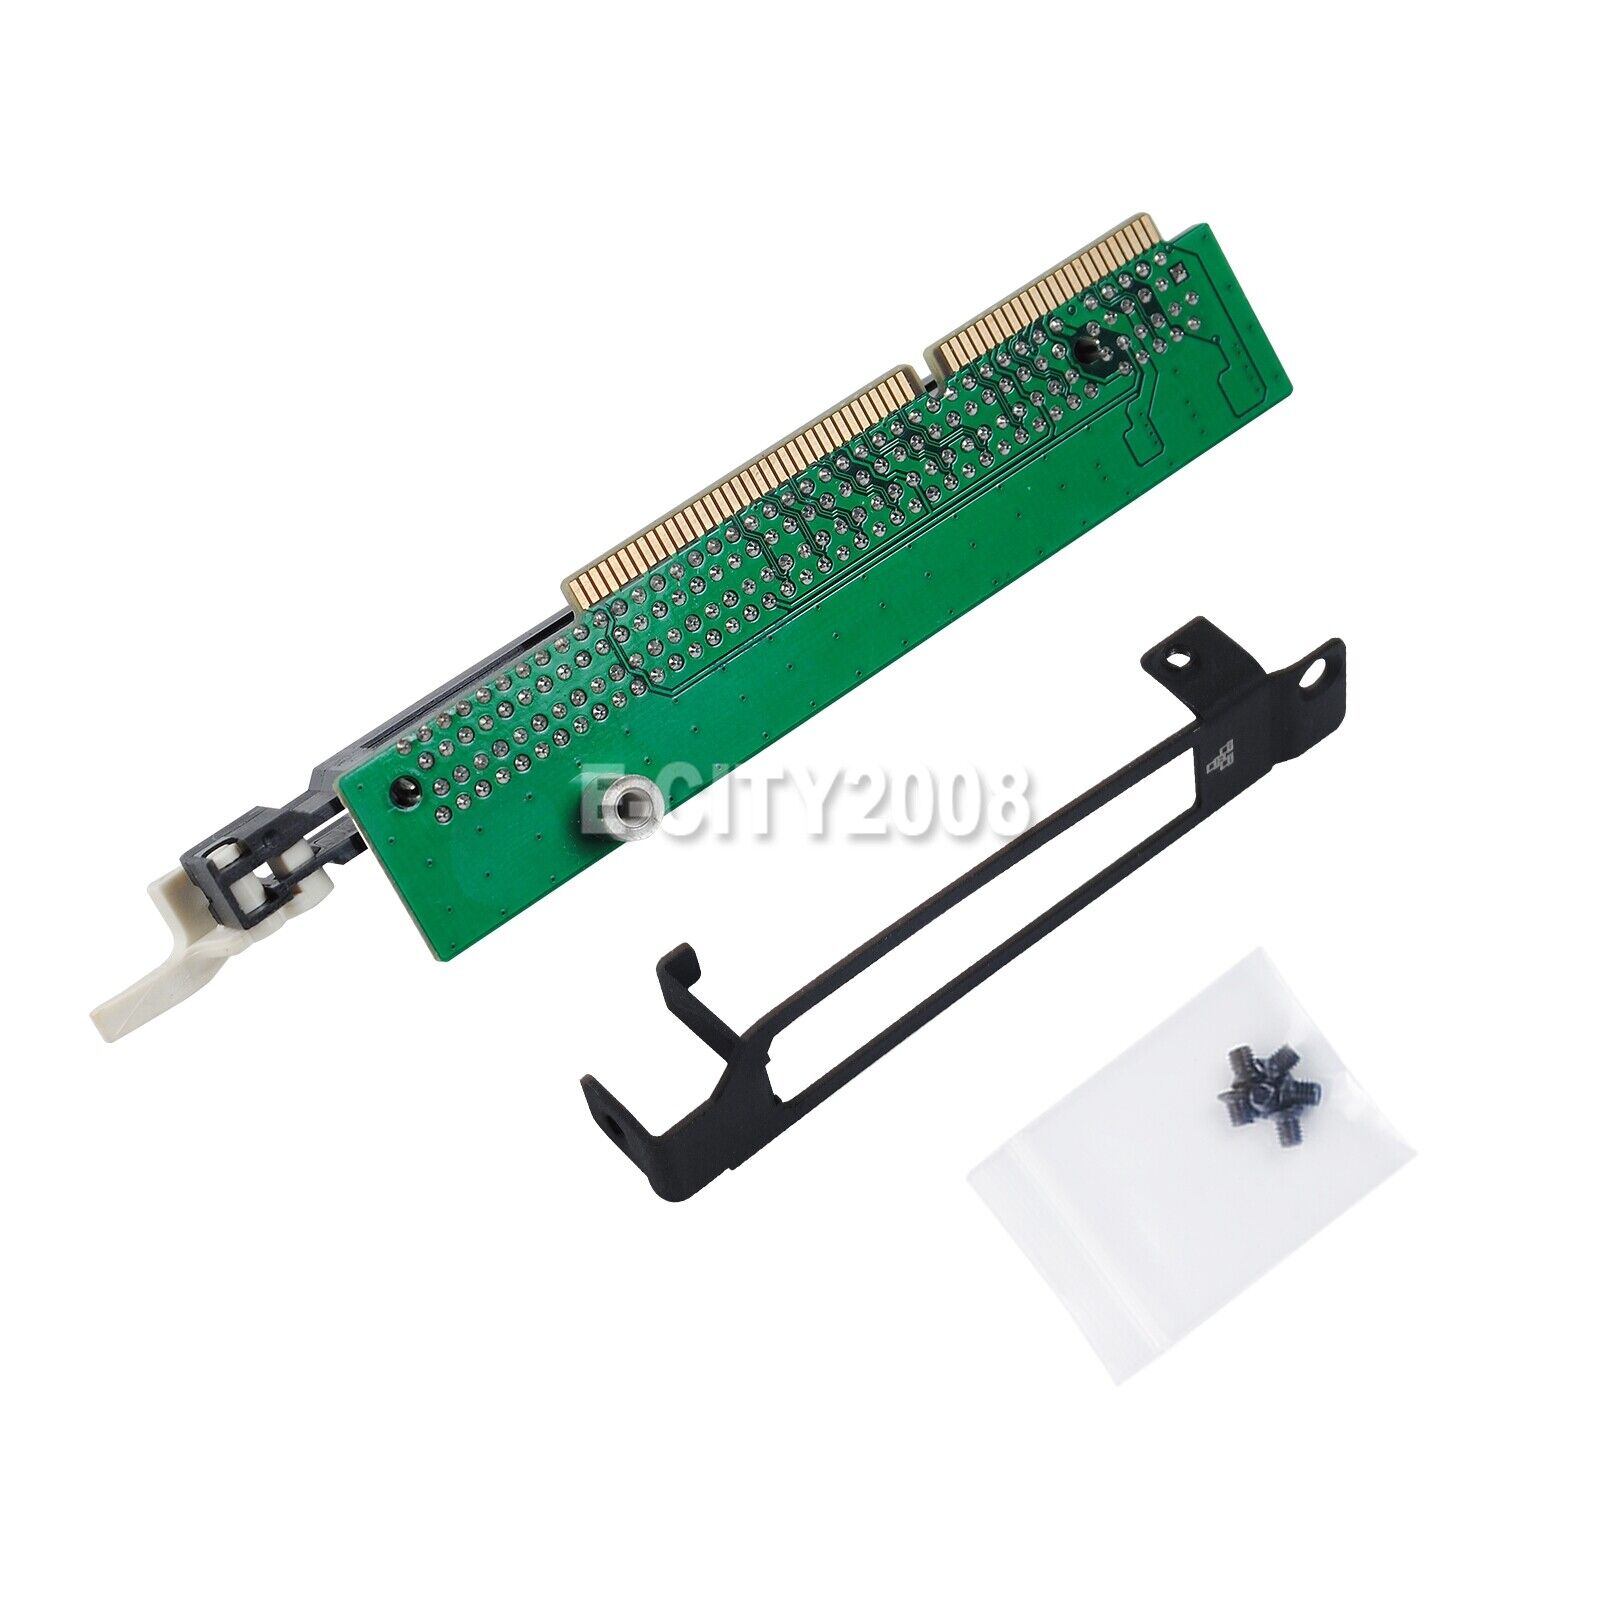 PCIE16 Expansion Graphic Card for ThinkCentre M920x M720q P330 Tiny5 01AJ940